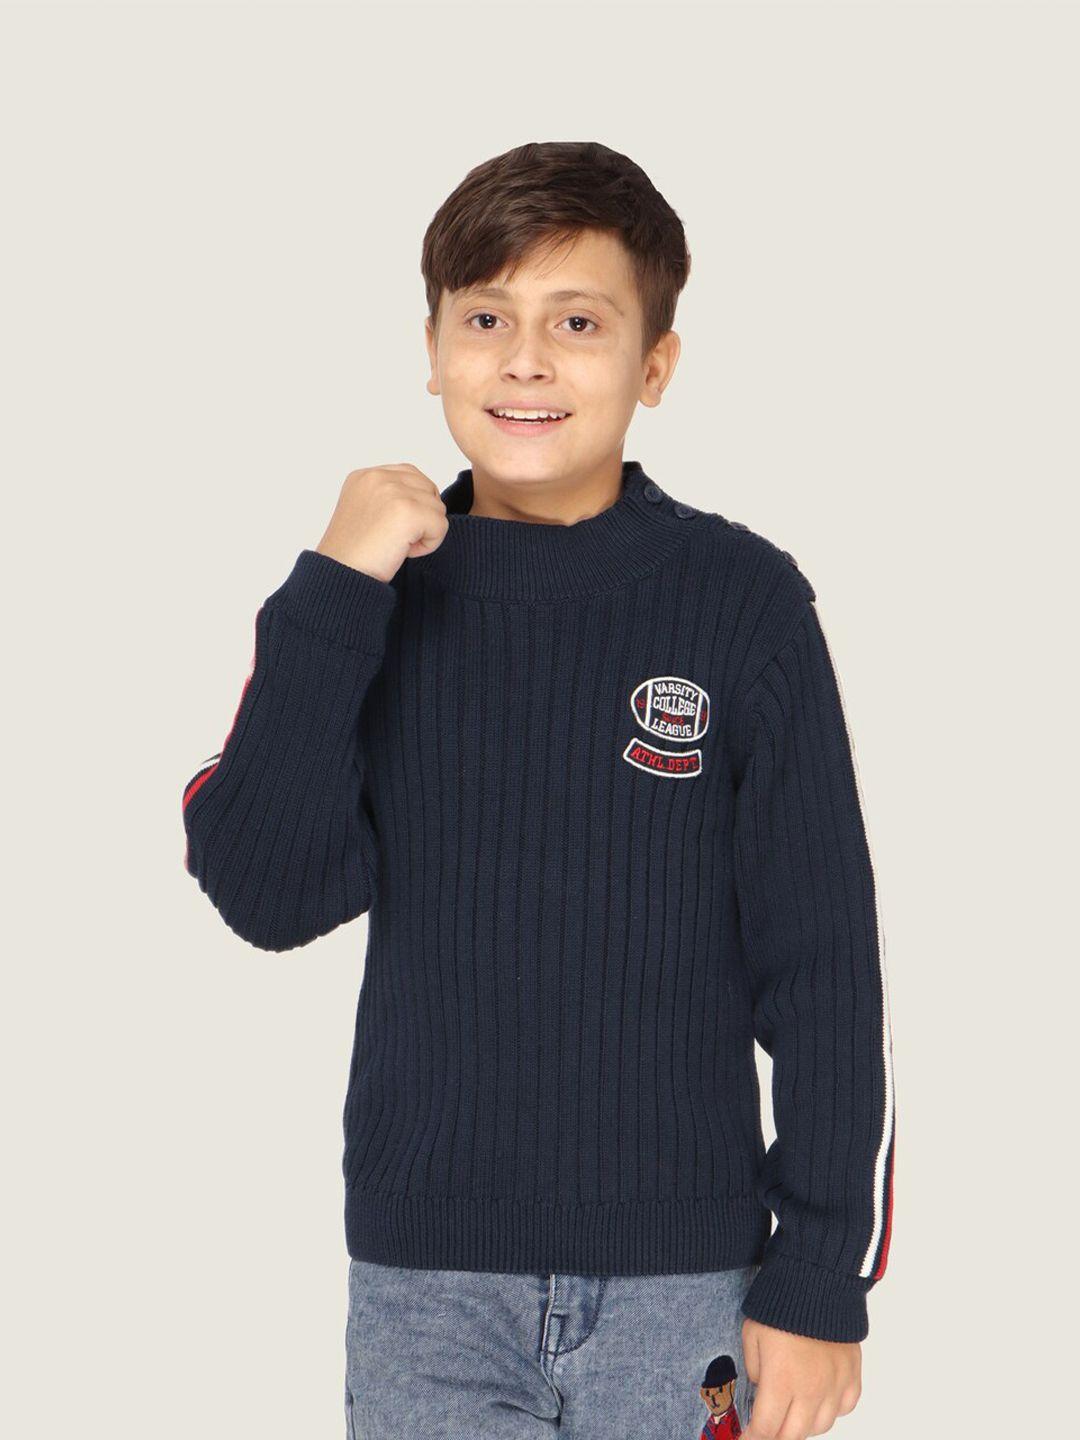 lasnak-boys-navy-blue-&-white-ribbed-pullover-cotton-pullover-sweater